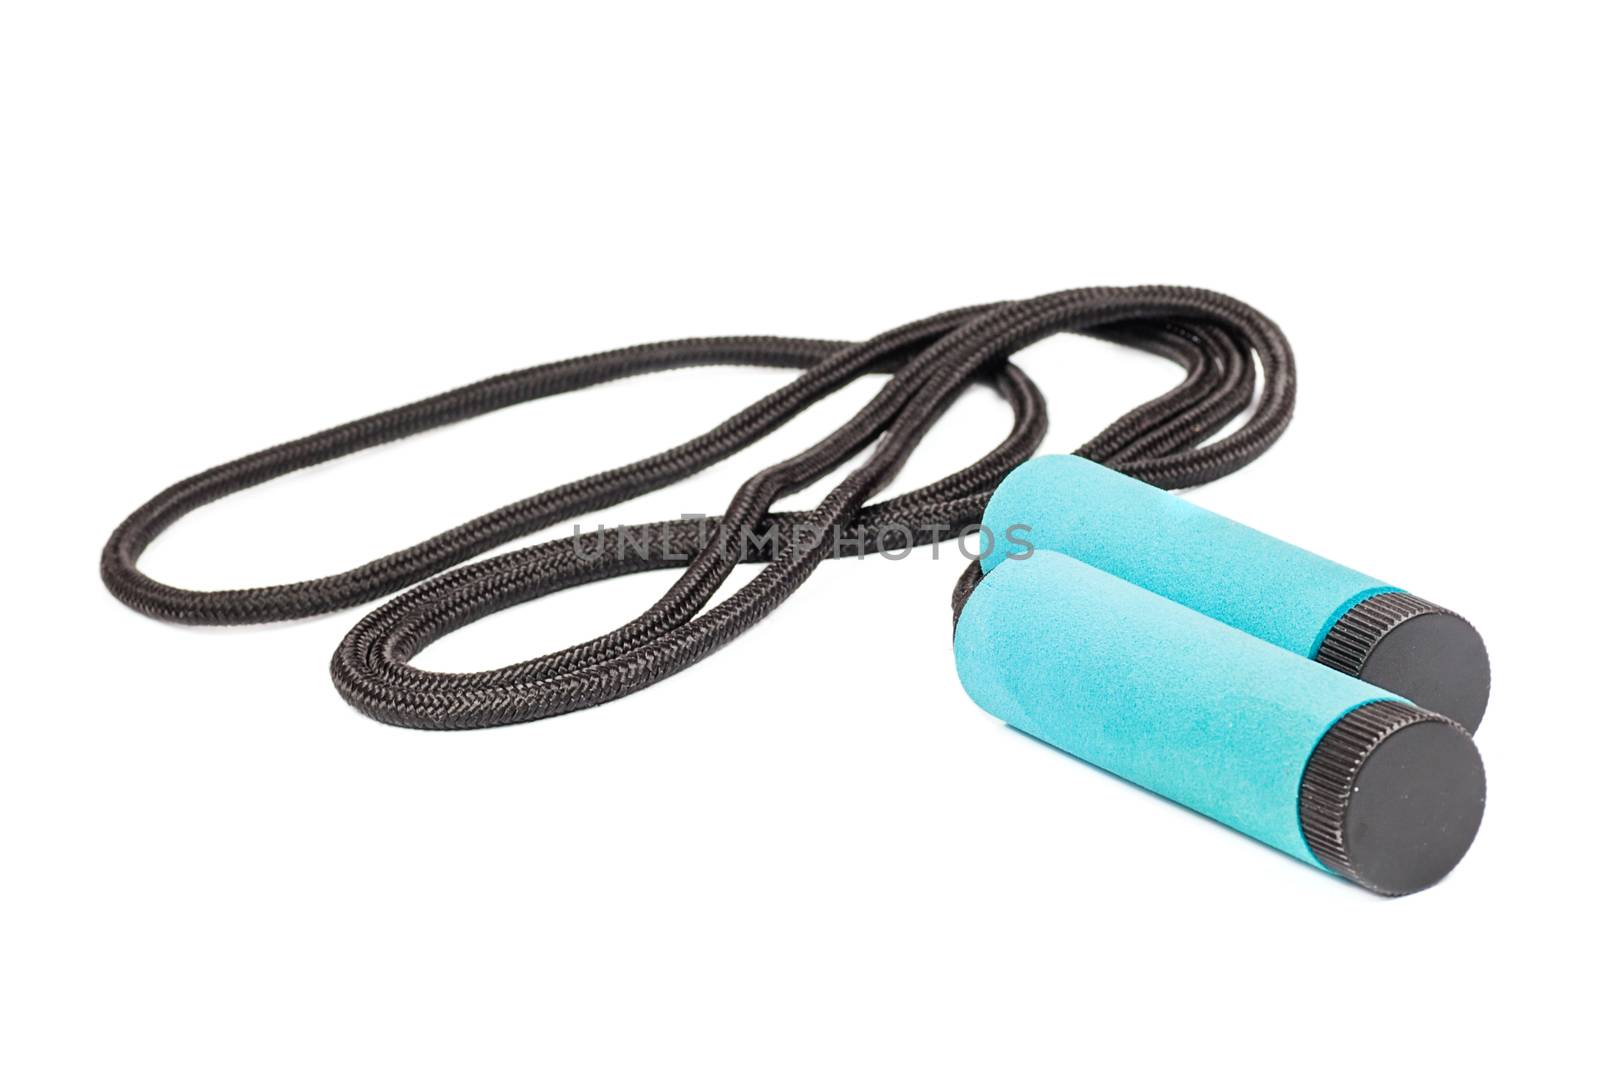 Black Skipping rope with blue handles isolated on white